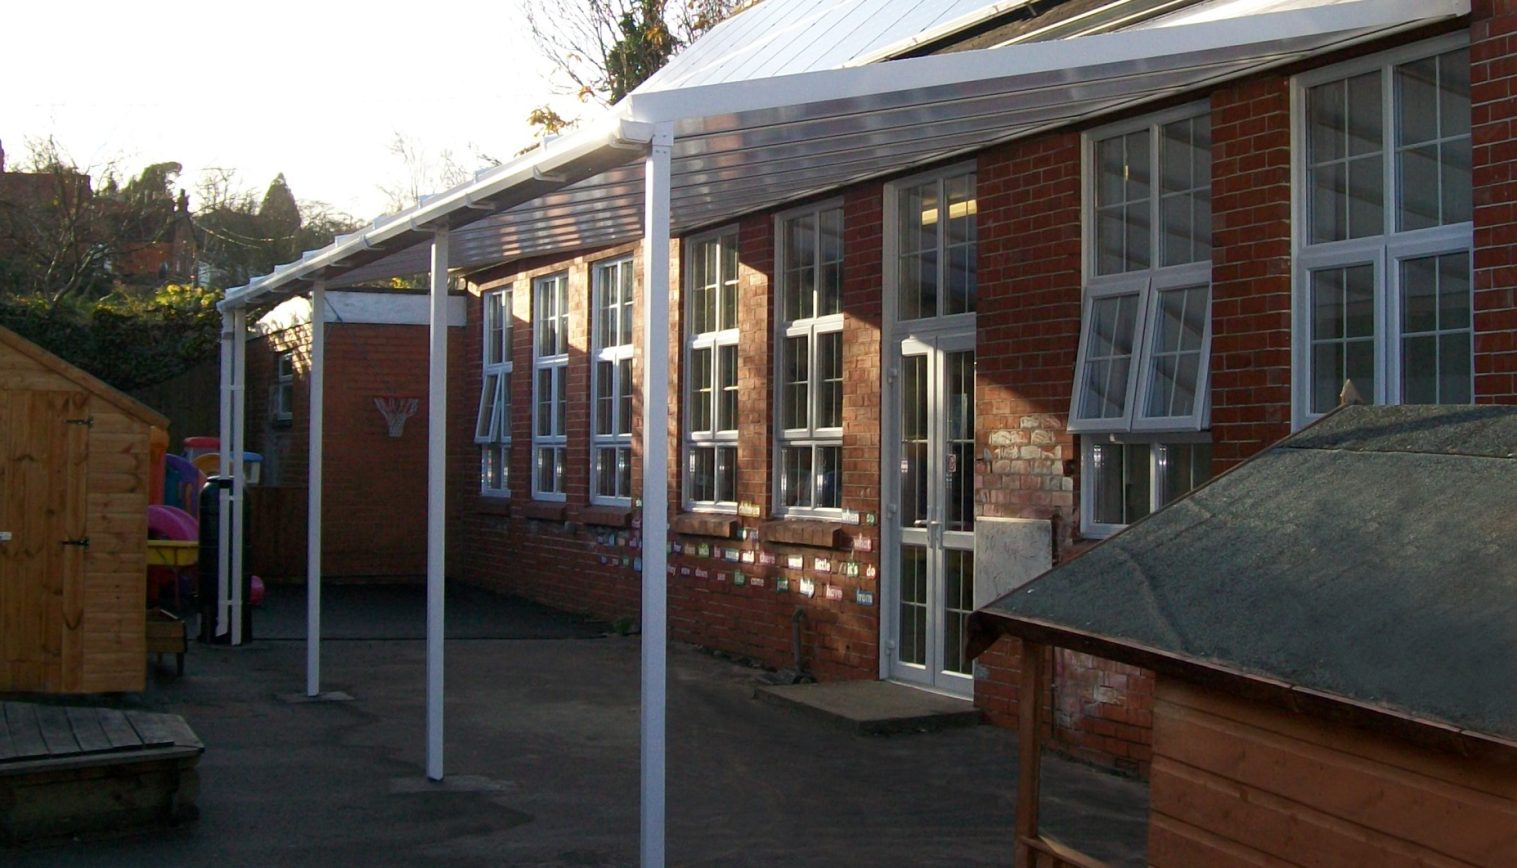 Wroughton Infant School – Wall Mounted Canopy